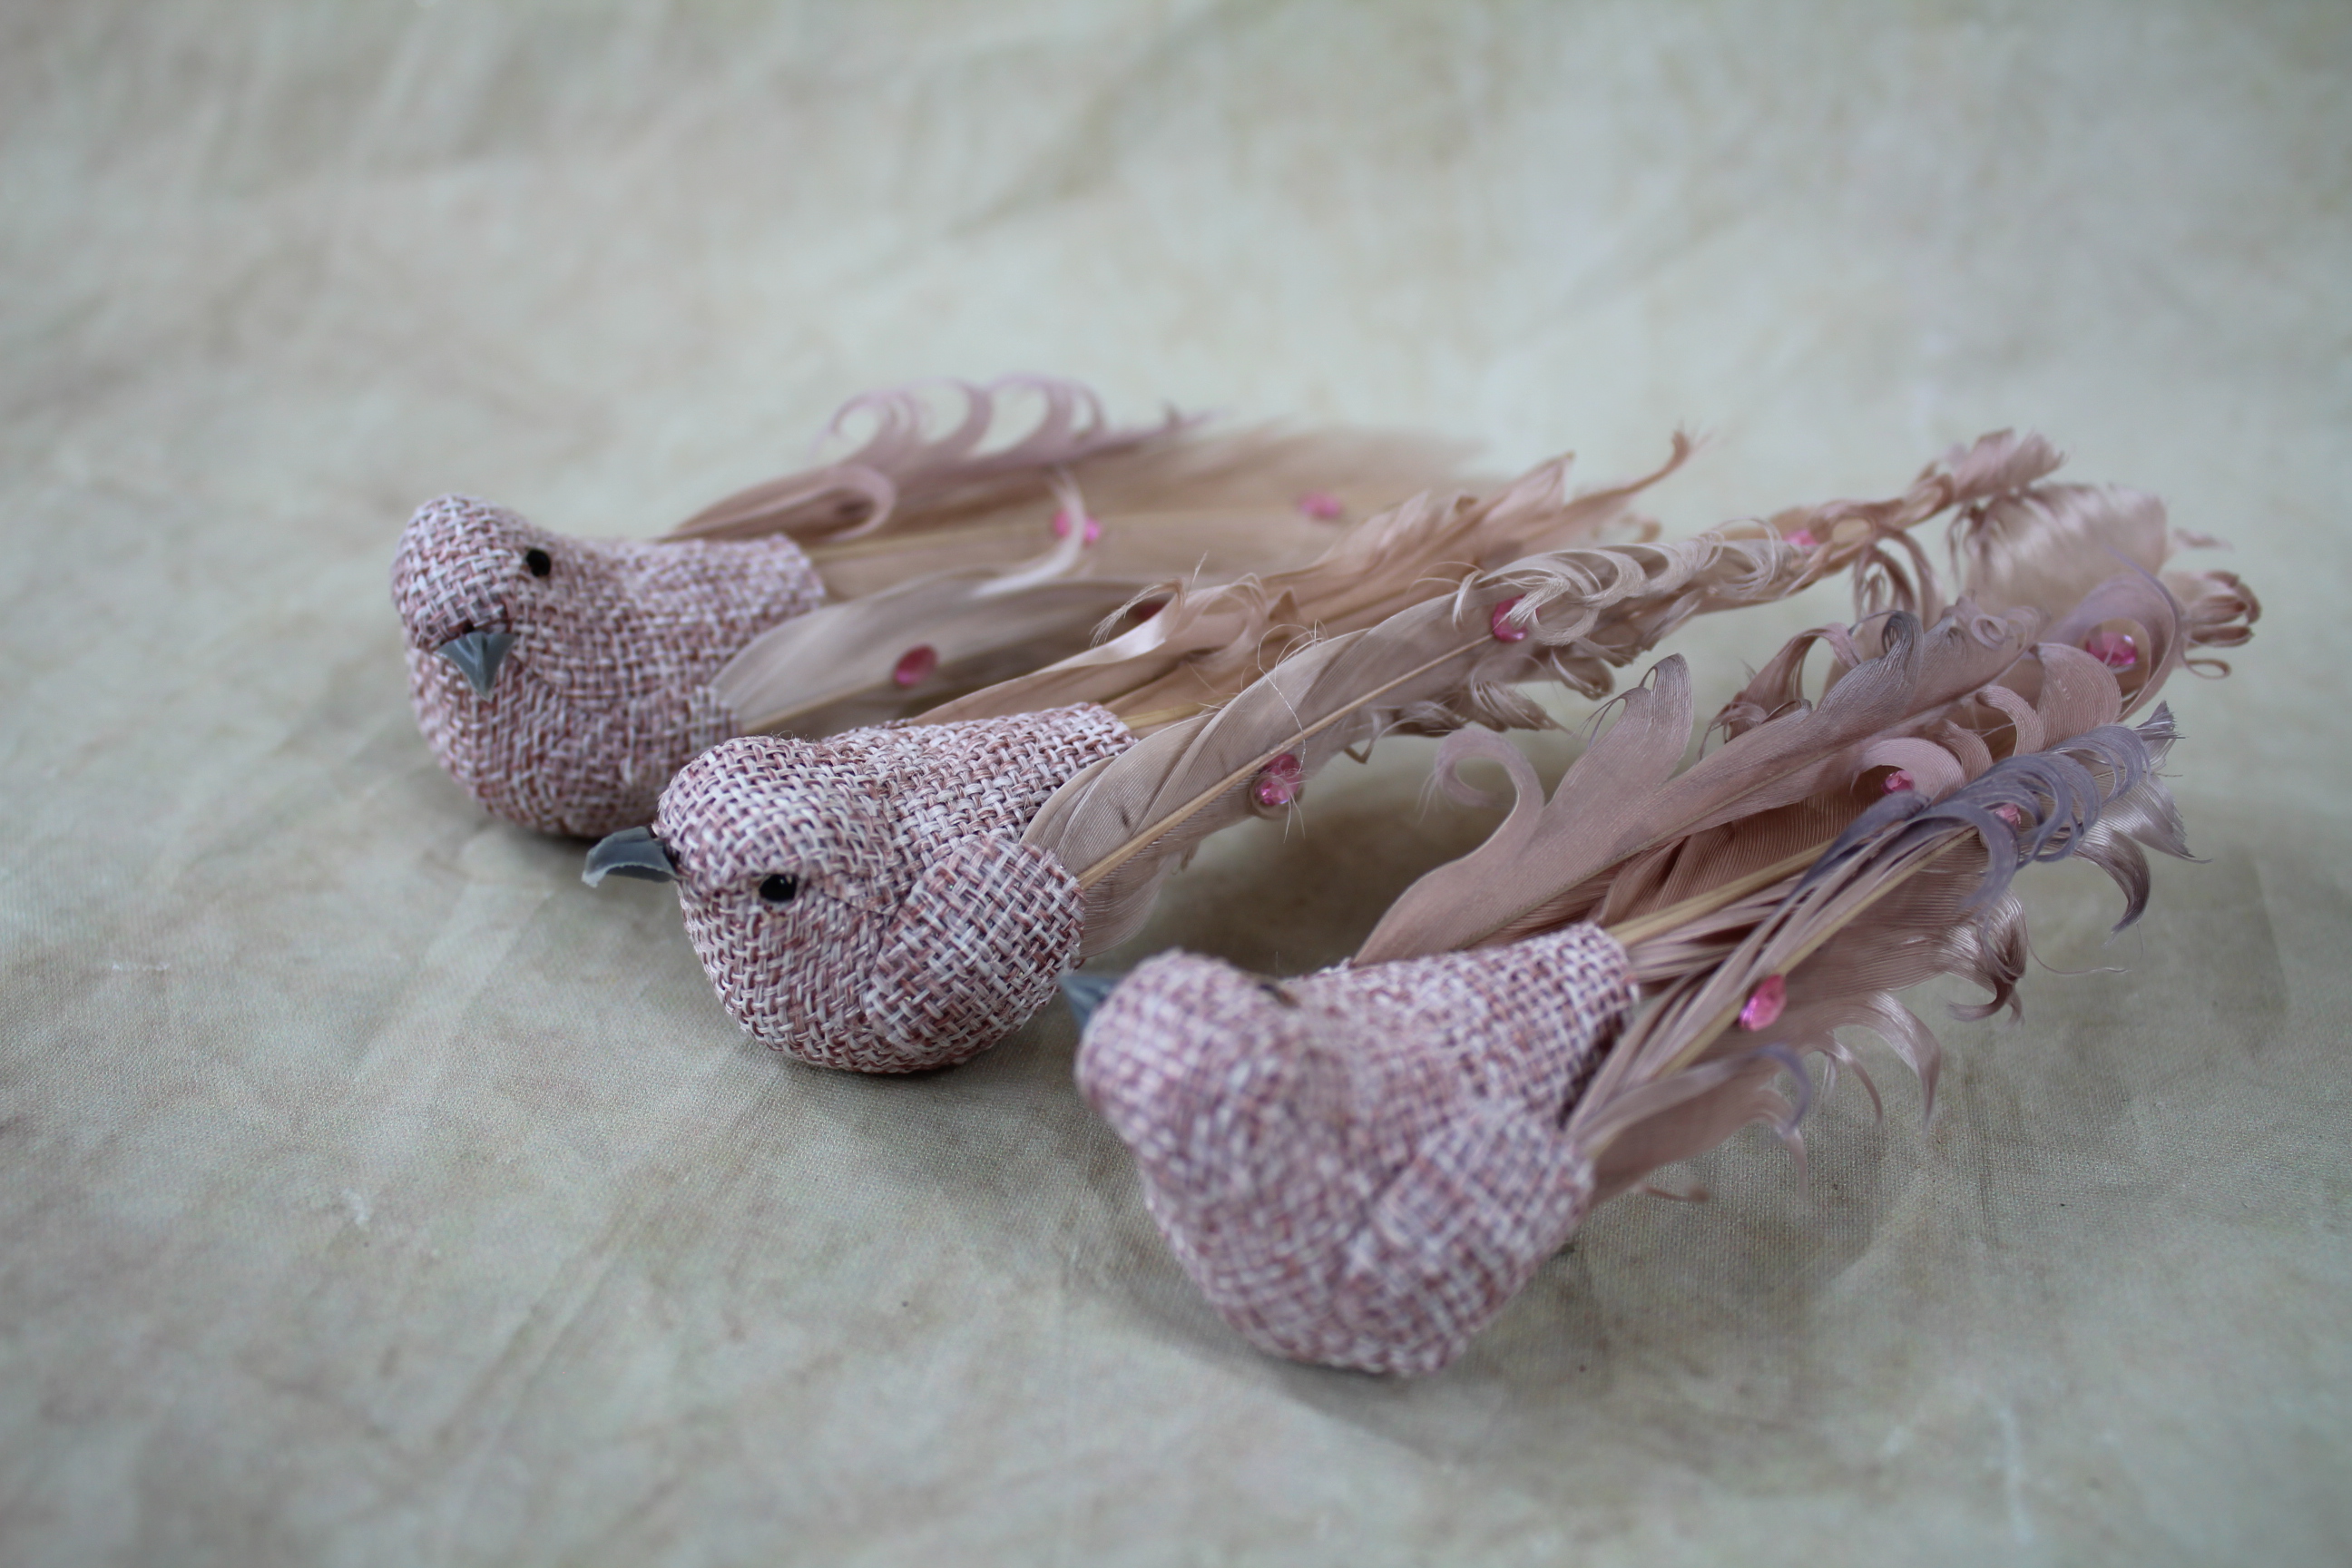 3 x 14cm hessian feather tail birds on clips